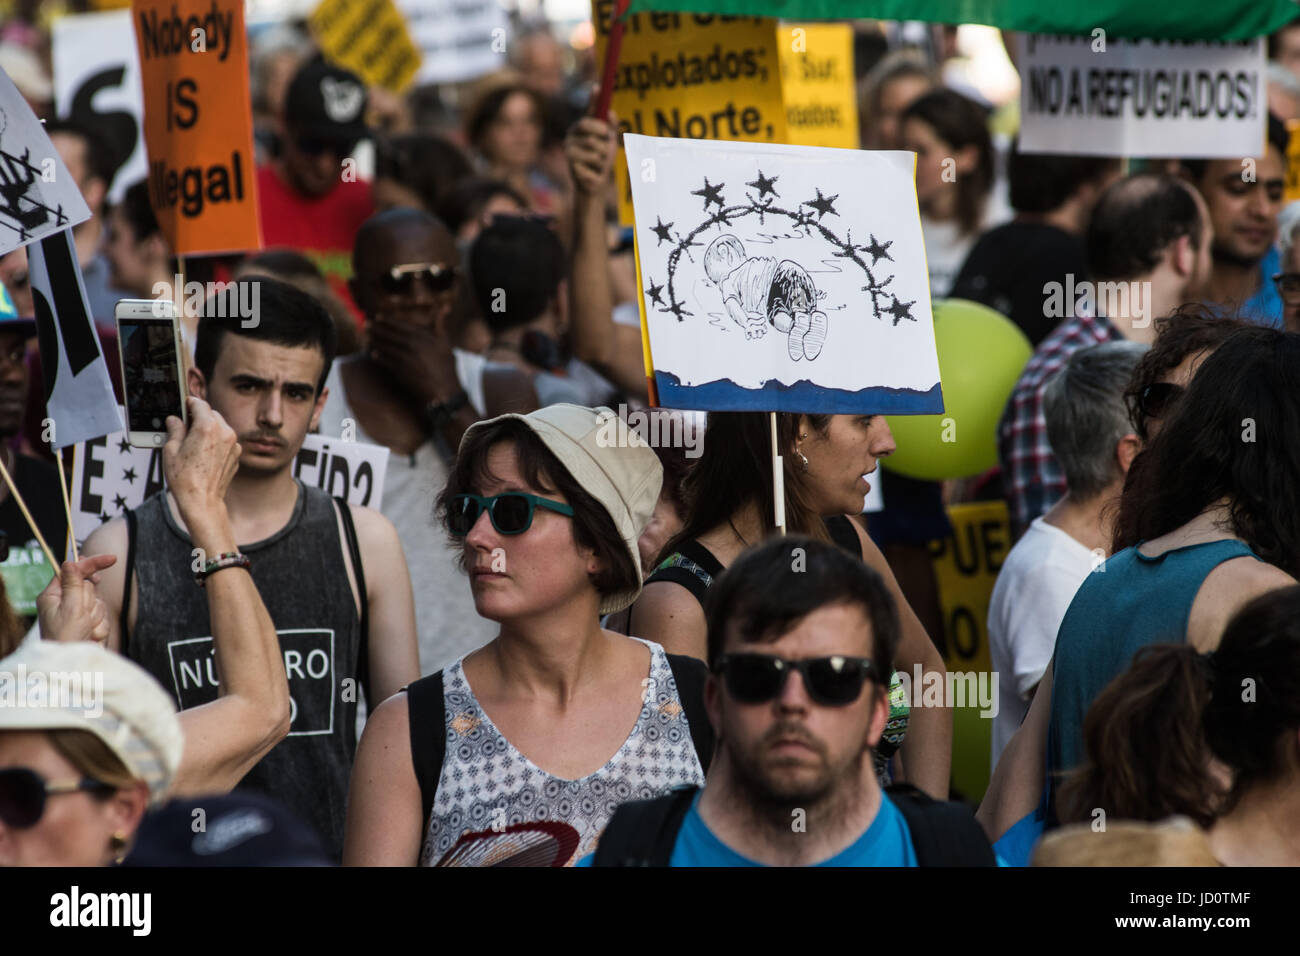 Madrid, Spain. 17th June, 2017. People demanding to welcome refugees during a demonstration against immigration policies. Credit: Marcos del Mazo/Alamy Live News Stock Photo